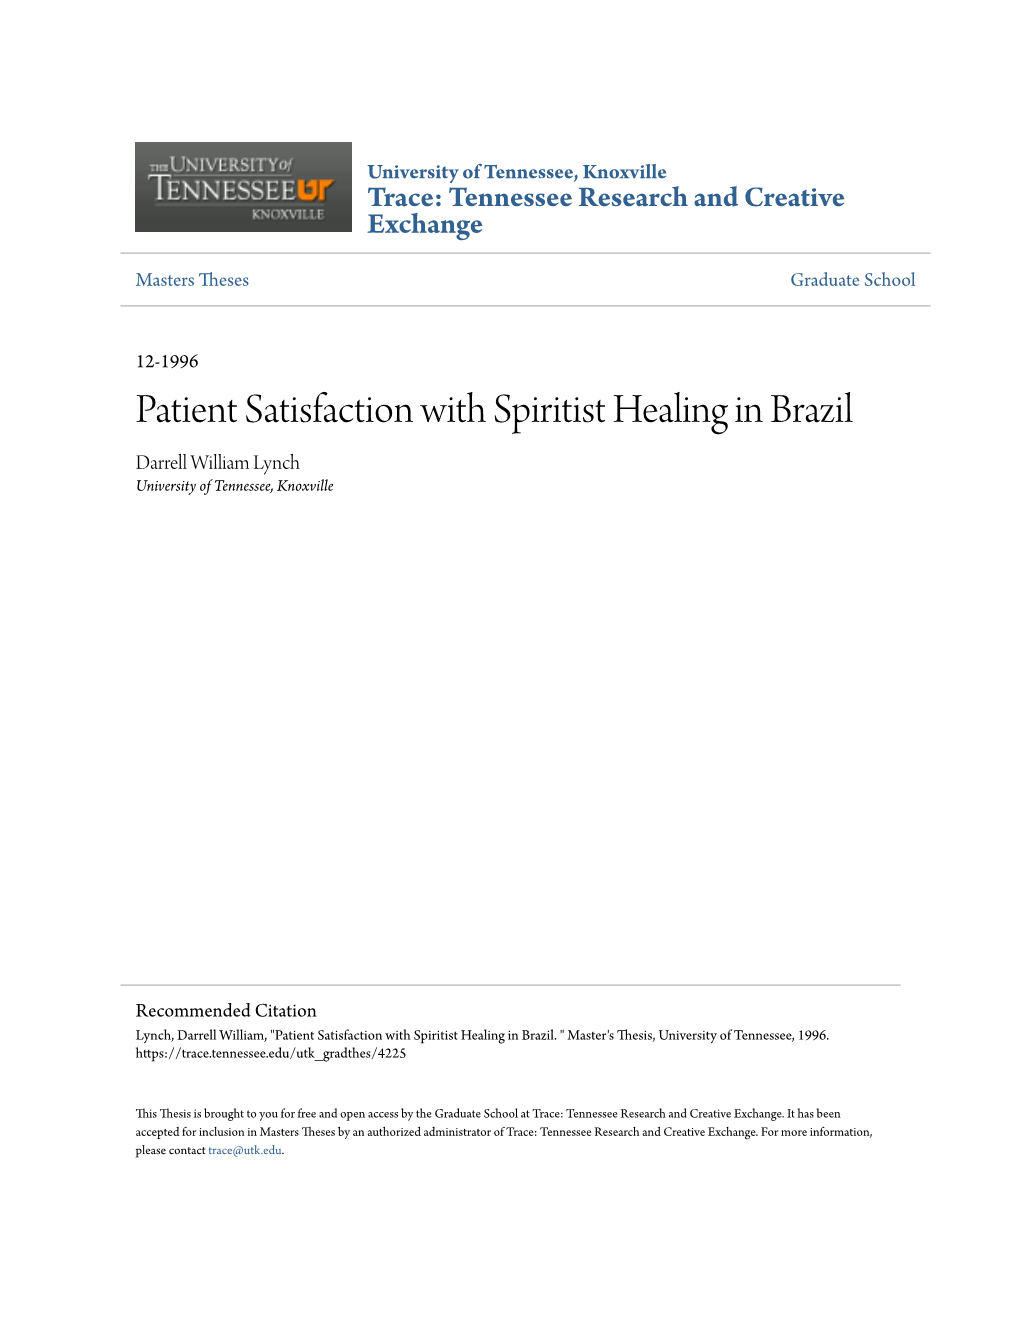 Patient Satisfaction with Spiritist Healing in Brazil Darrell William Lynch University of Tennessee, Knoxville